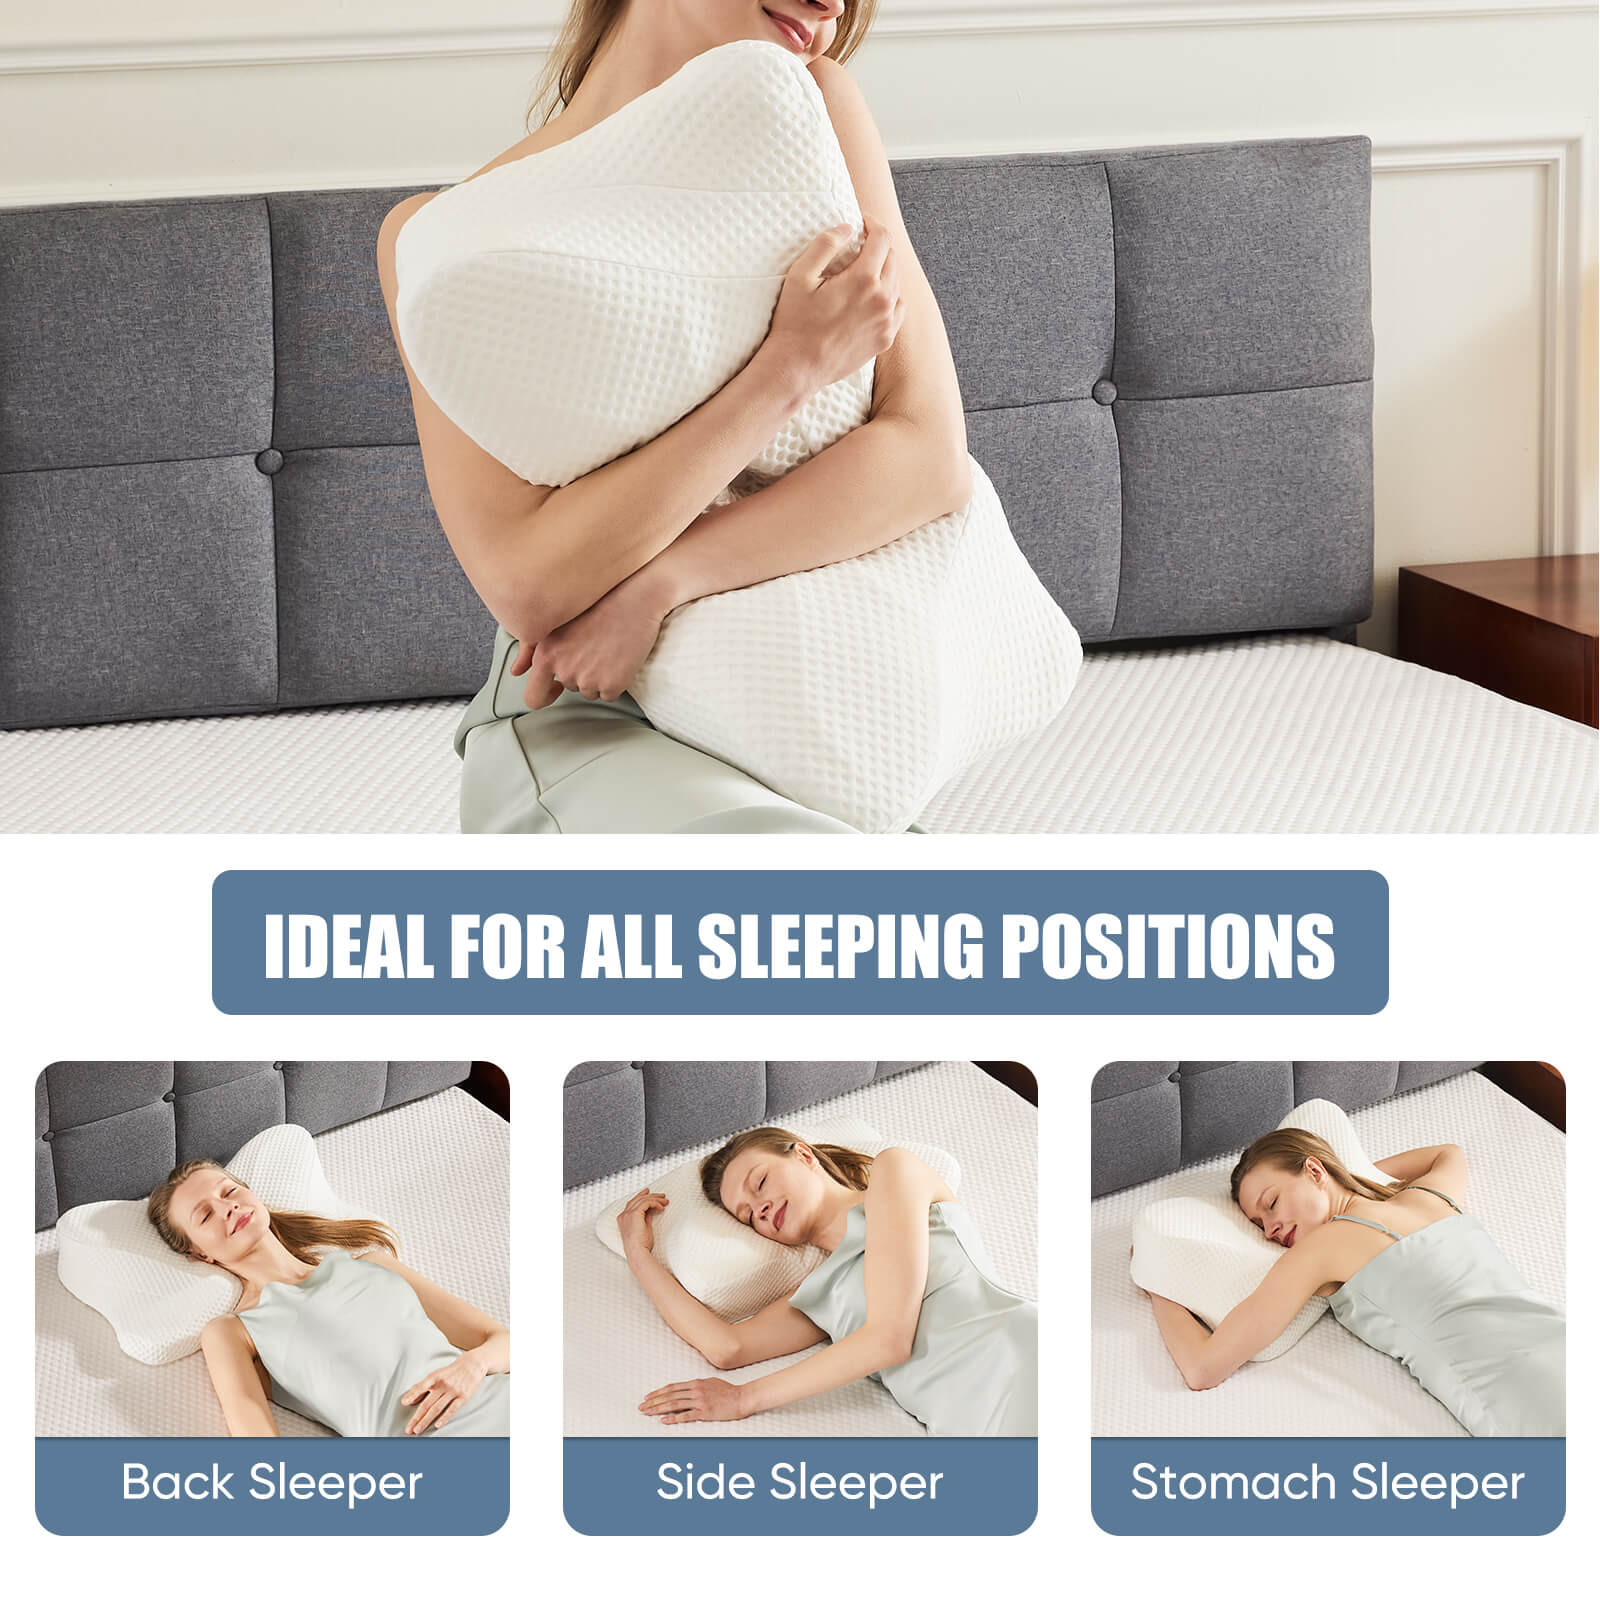 Cervical Neck Pillow-Memory Foam Ergonomic Contour Bed Pillows for Neck Pain Relief Cervical Neck Pillow Orthopedic Pillow for Improved Sleep Comfort and Support